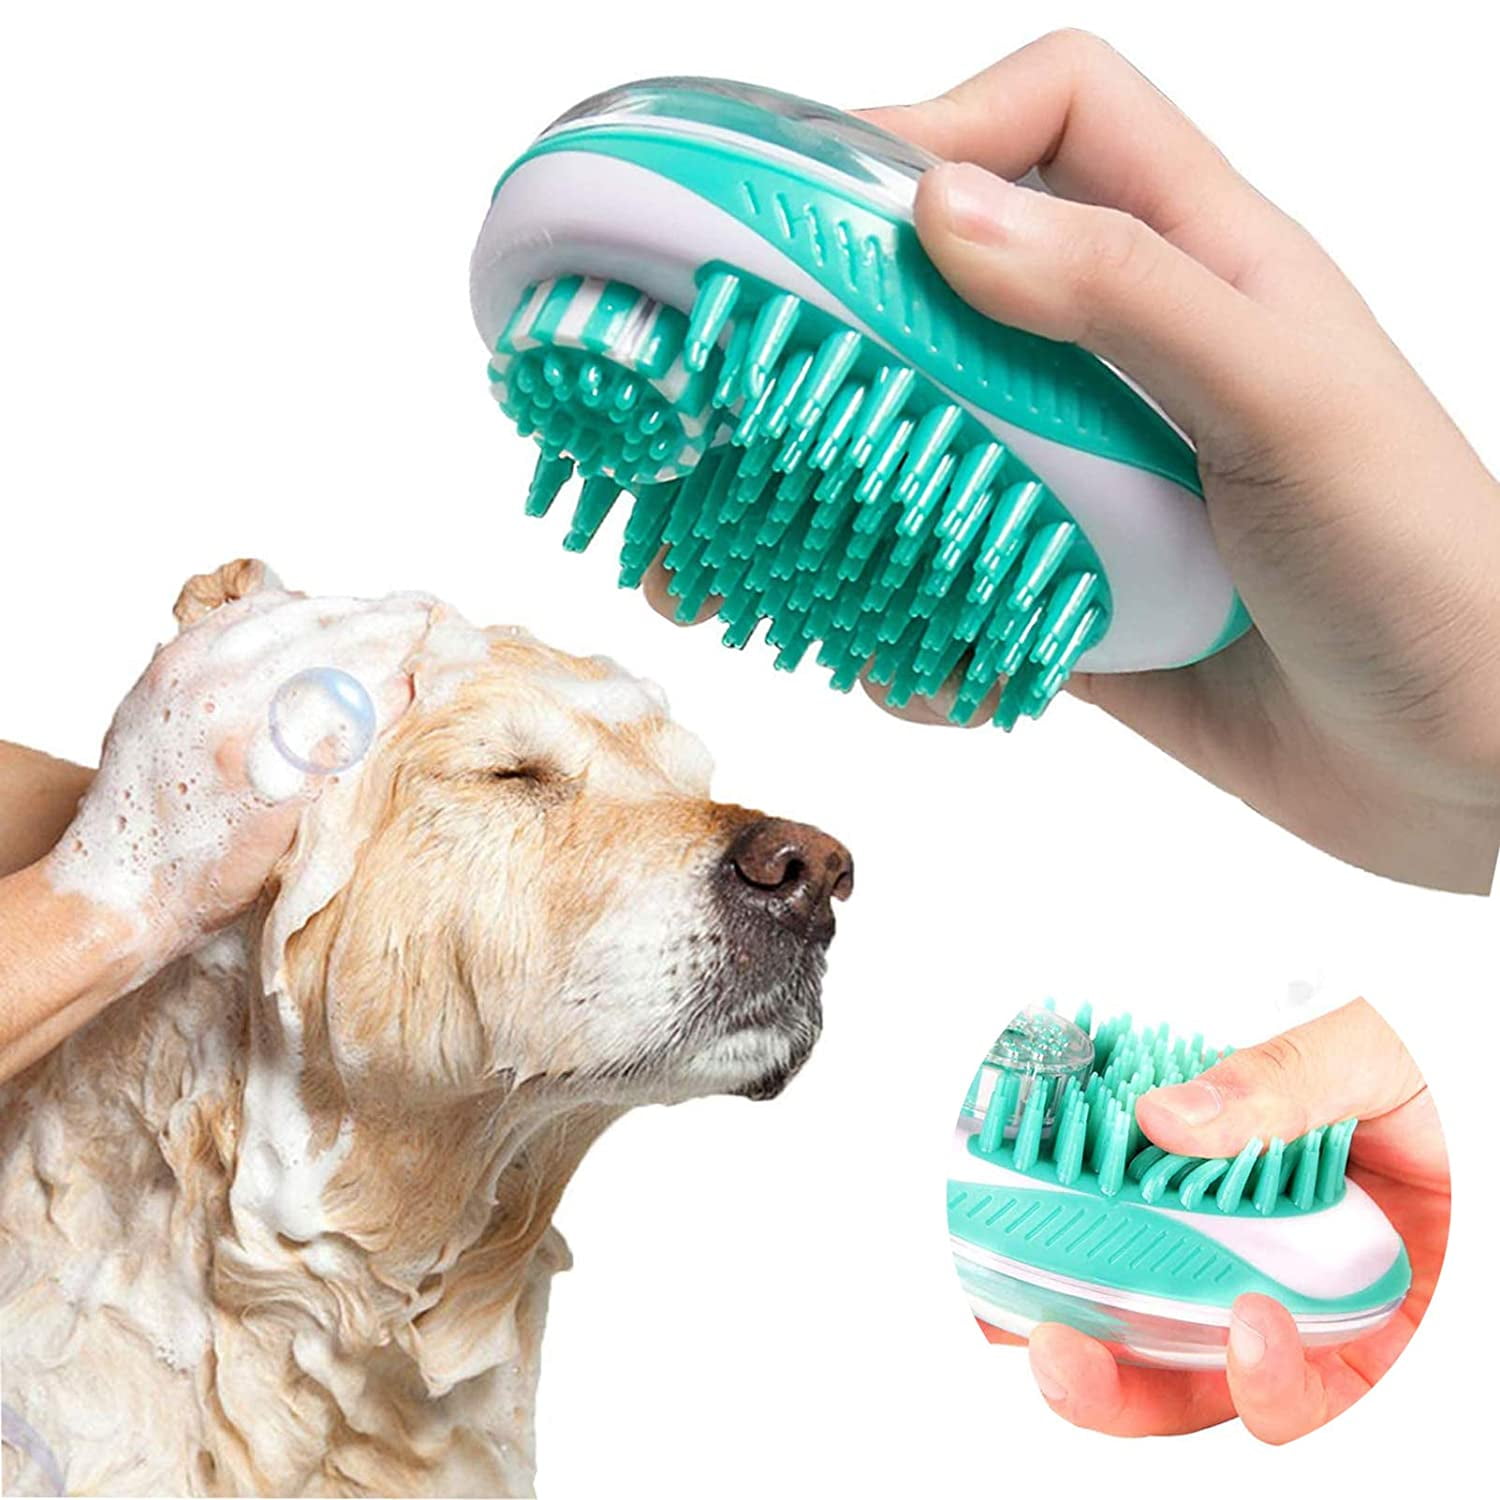 Green Dog Bath Brush Best Dog Owner Gifts for Short to Medium Hair Dogs Grooming Brush and Massager for Pets Dog Deshedding Brush Gently Removes Loose Hair Anti Slip Brush for Dogs